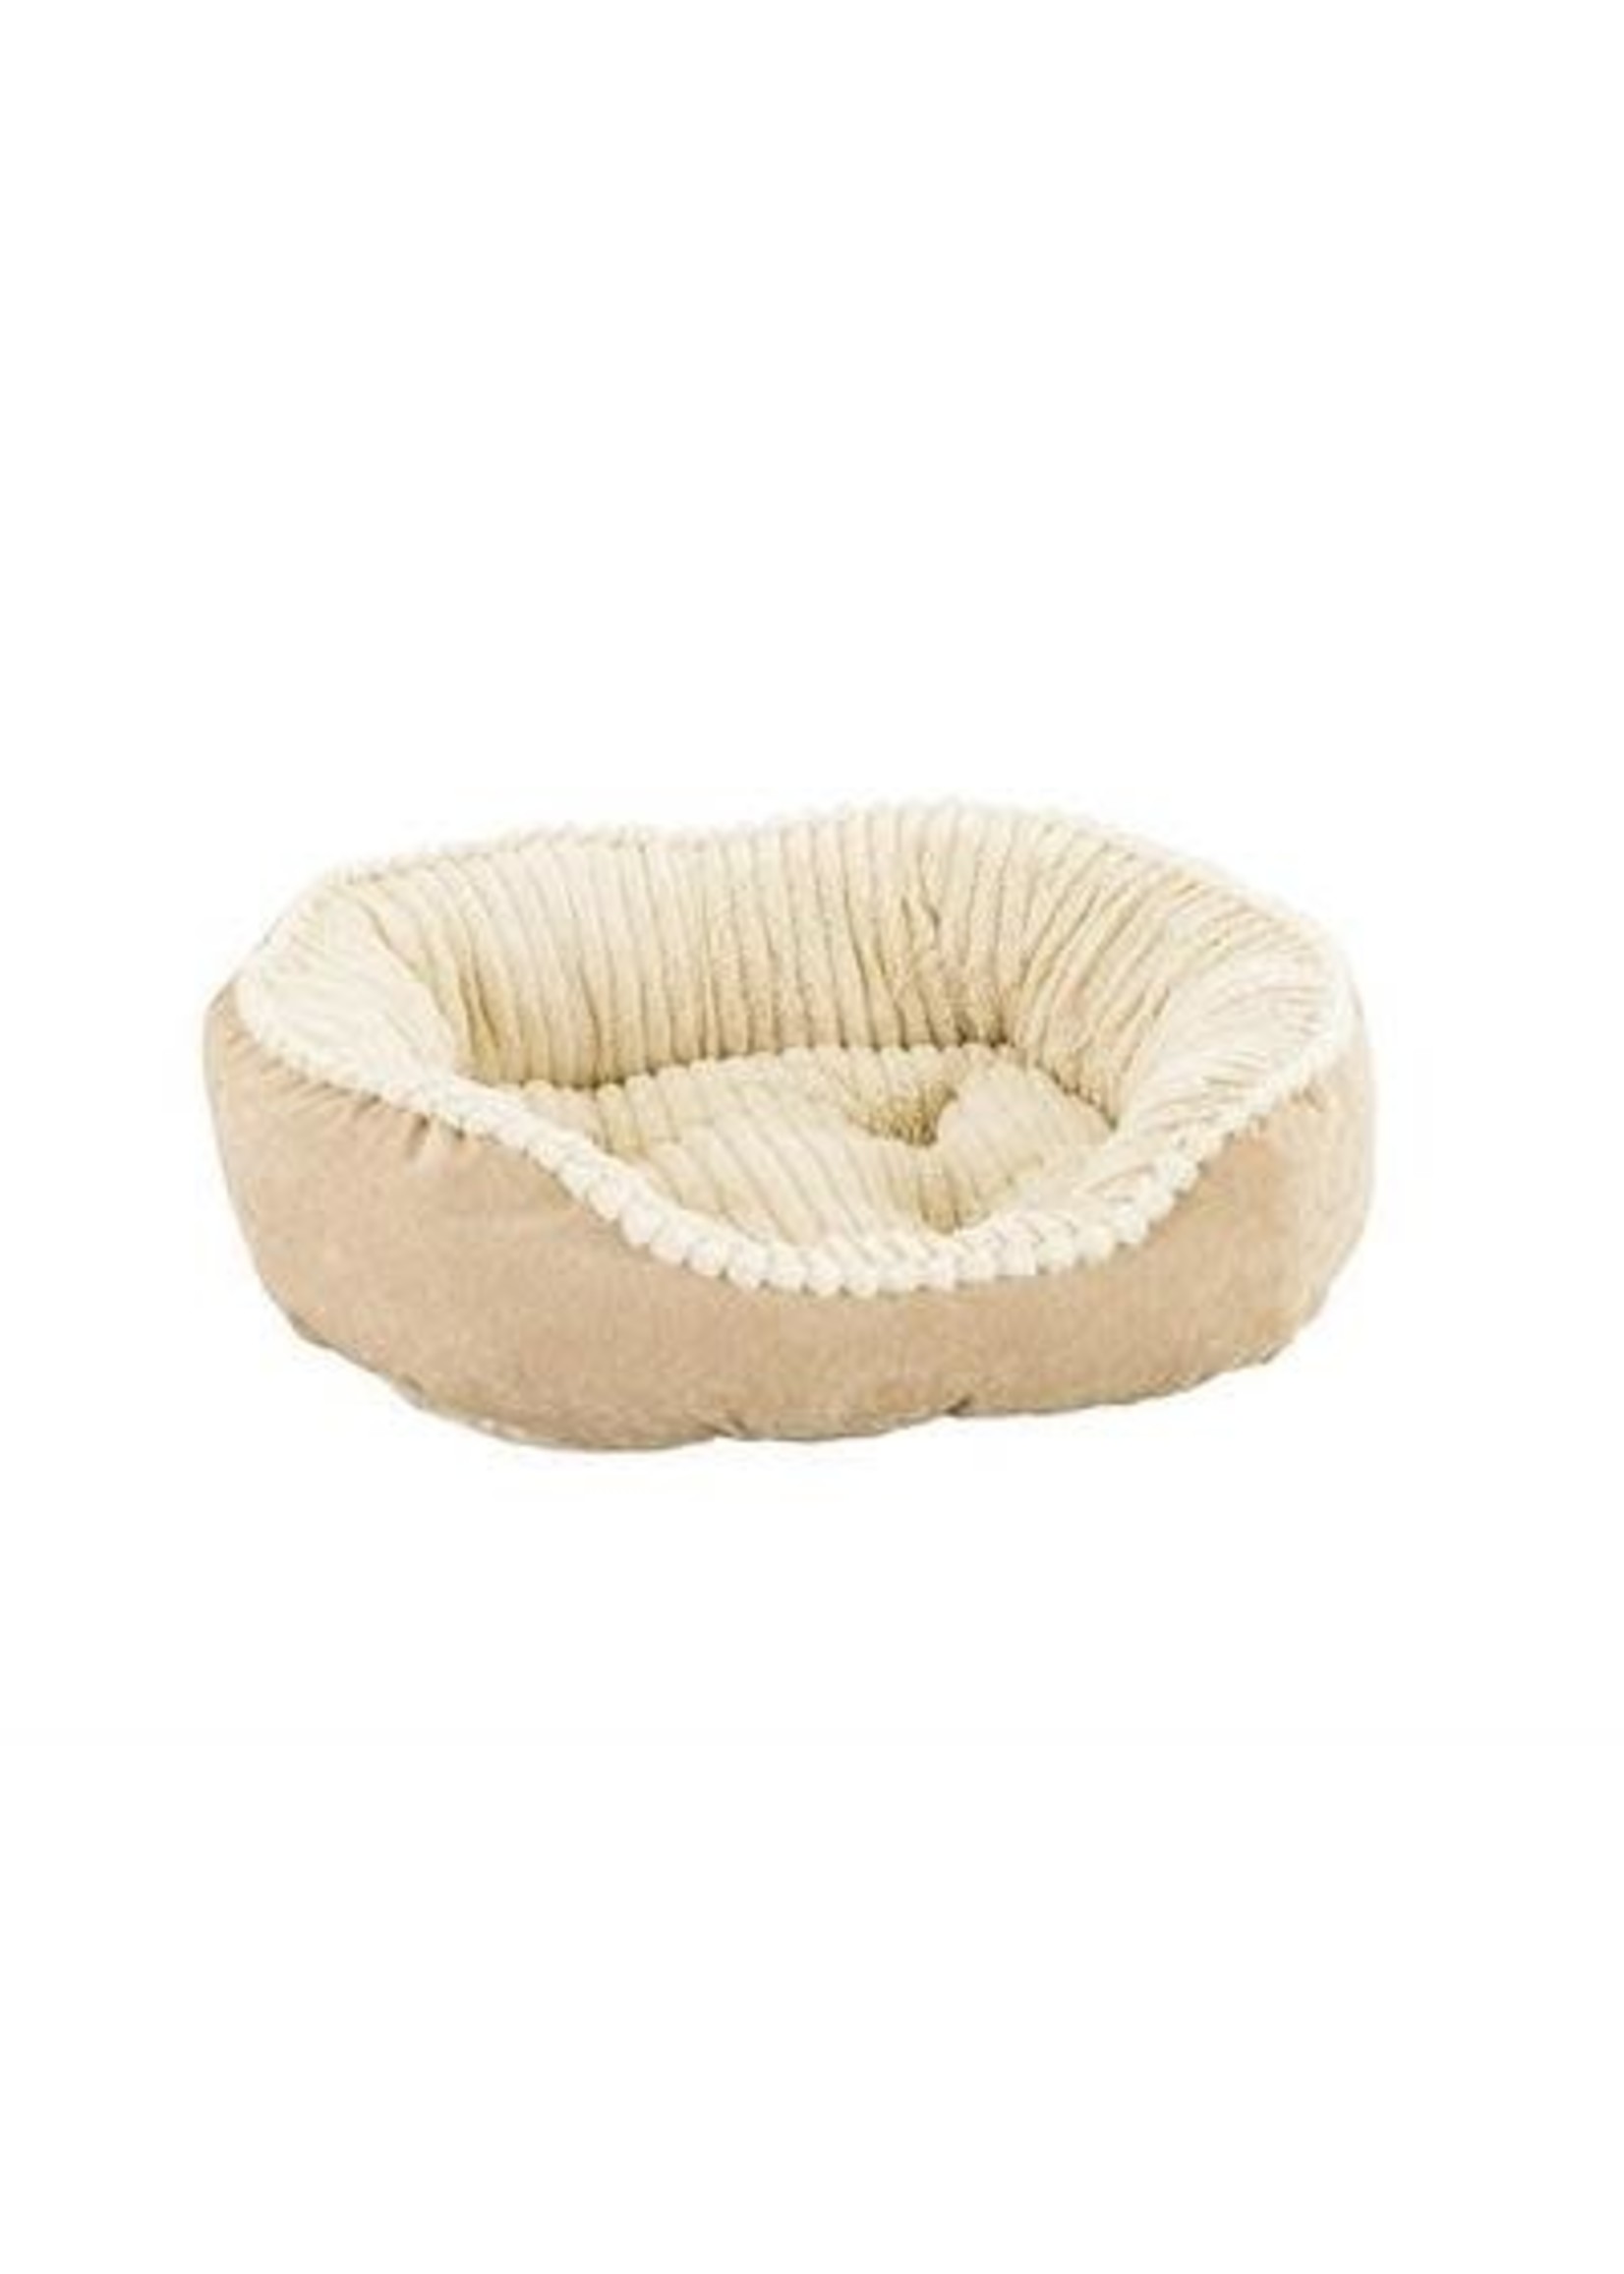 Ethical Ethical - Carved Plush Bed 26"